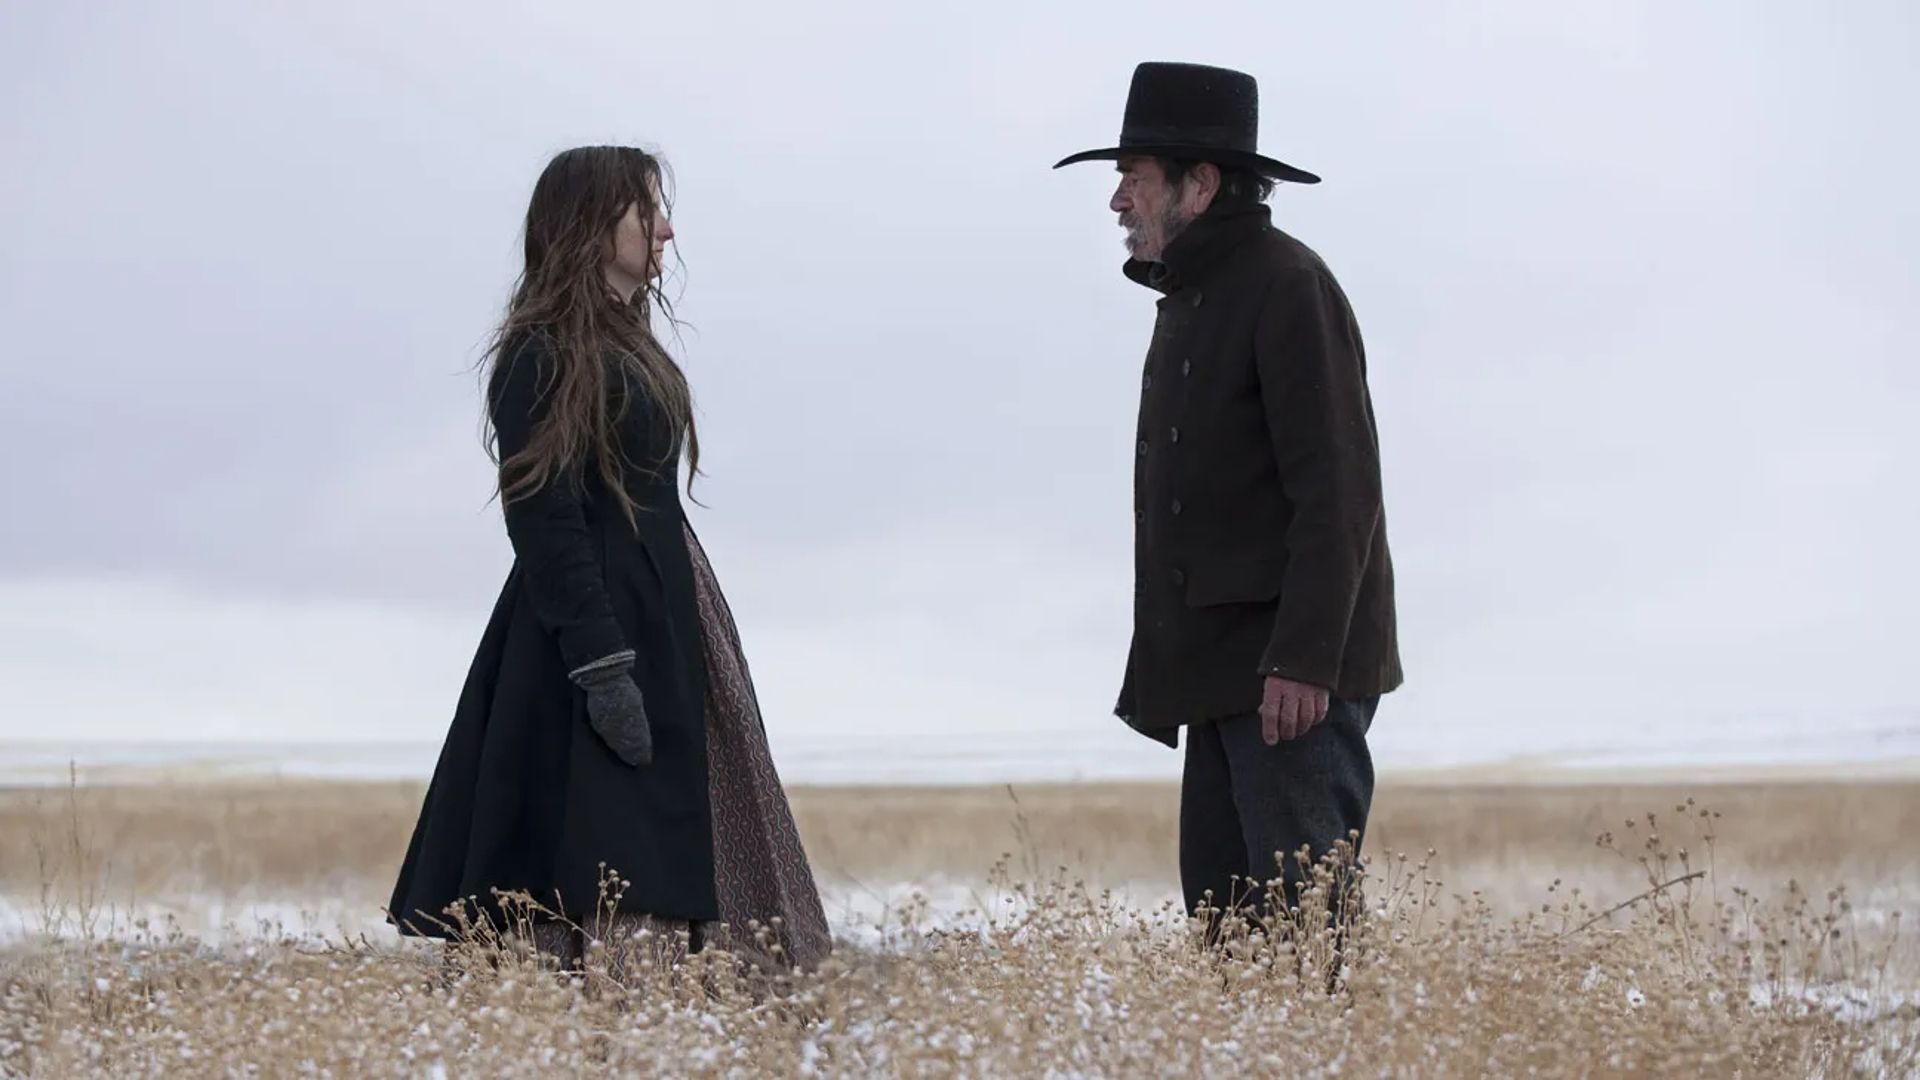 Arabella and George face off in a field in The Homesman